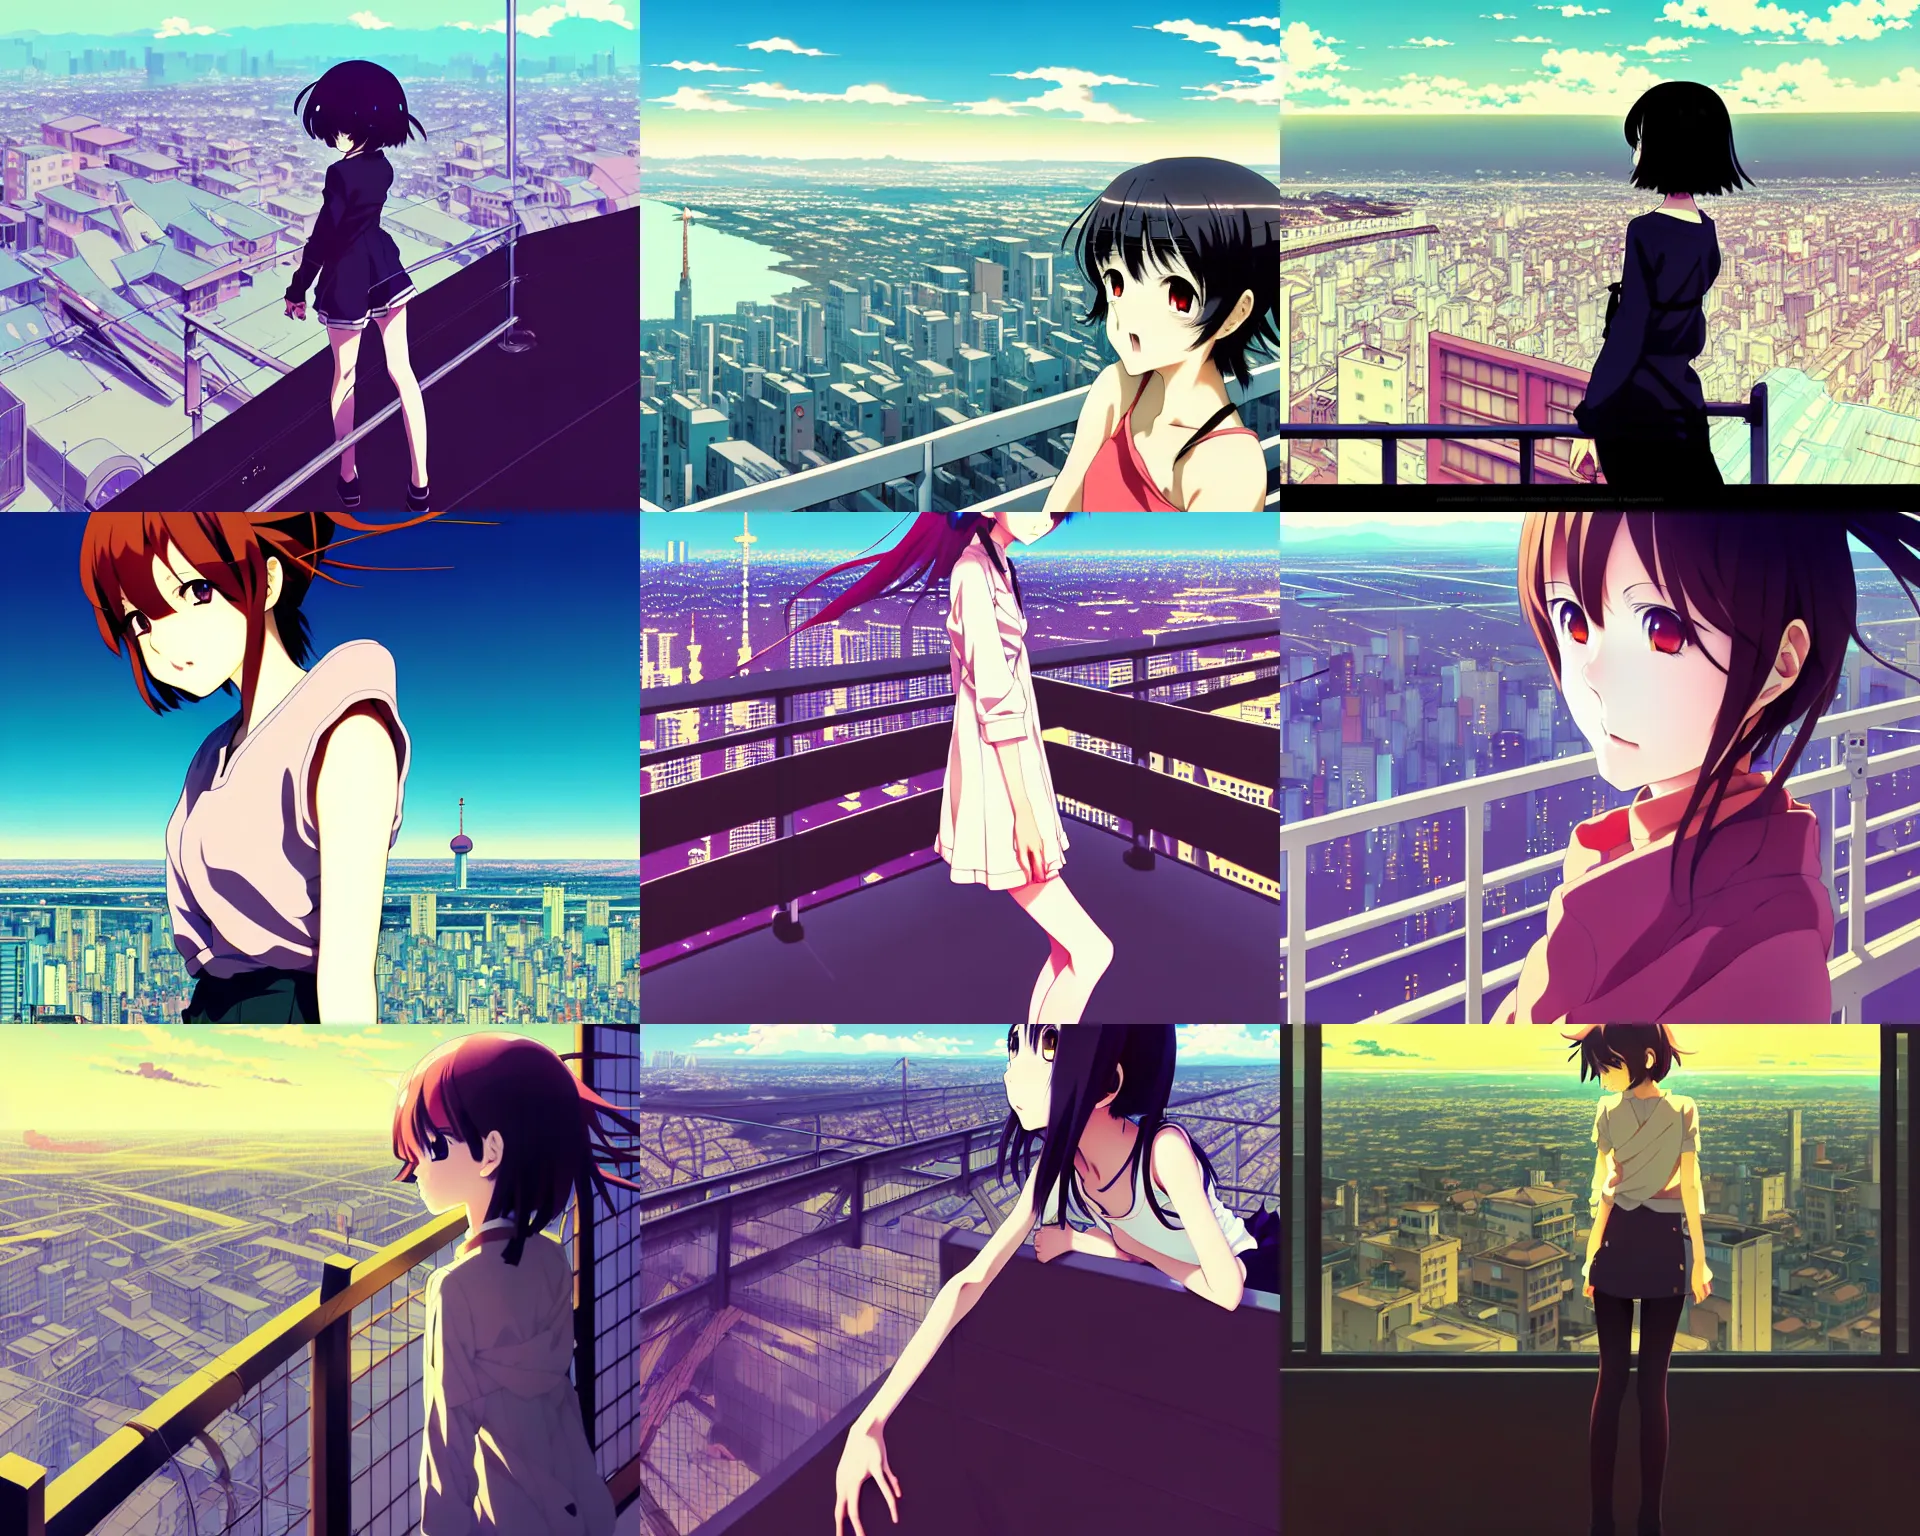 Prompt: anime frames, anime visual, portrait of a young female traveler sight seeing above the city, guardrails, very low light, cute face by ilya kuvshinov and yoh yoshinari, katsura masakazu, mucha, dynamic pose, dynamic perspective, strong silhouette, anime cels, rounded eyes, smooth facial features, contrasting shadows, soft